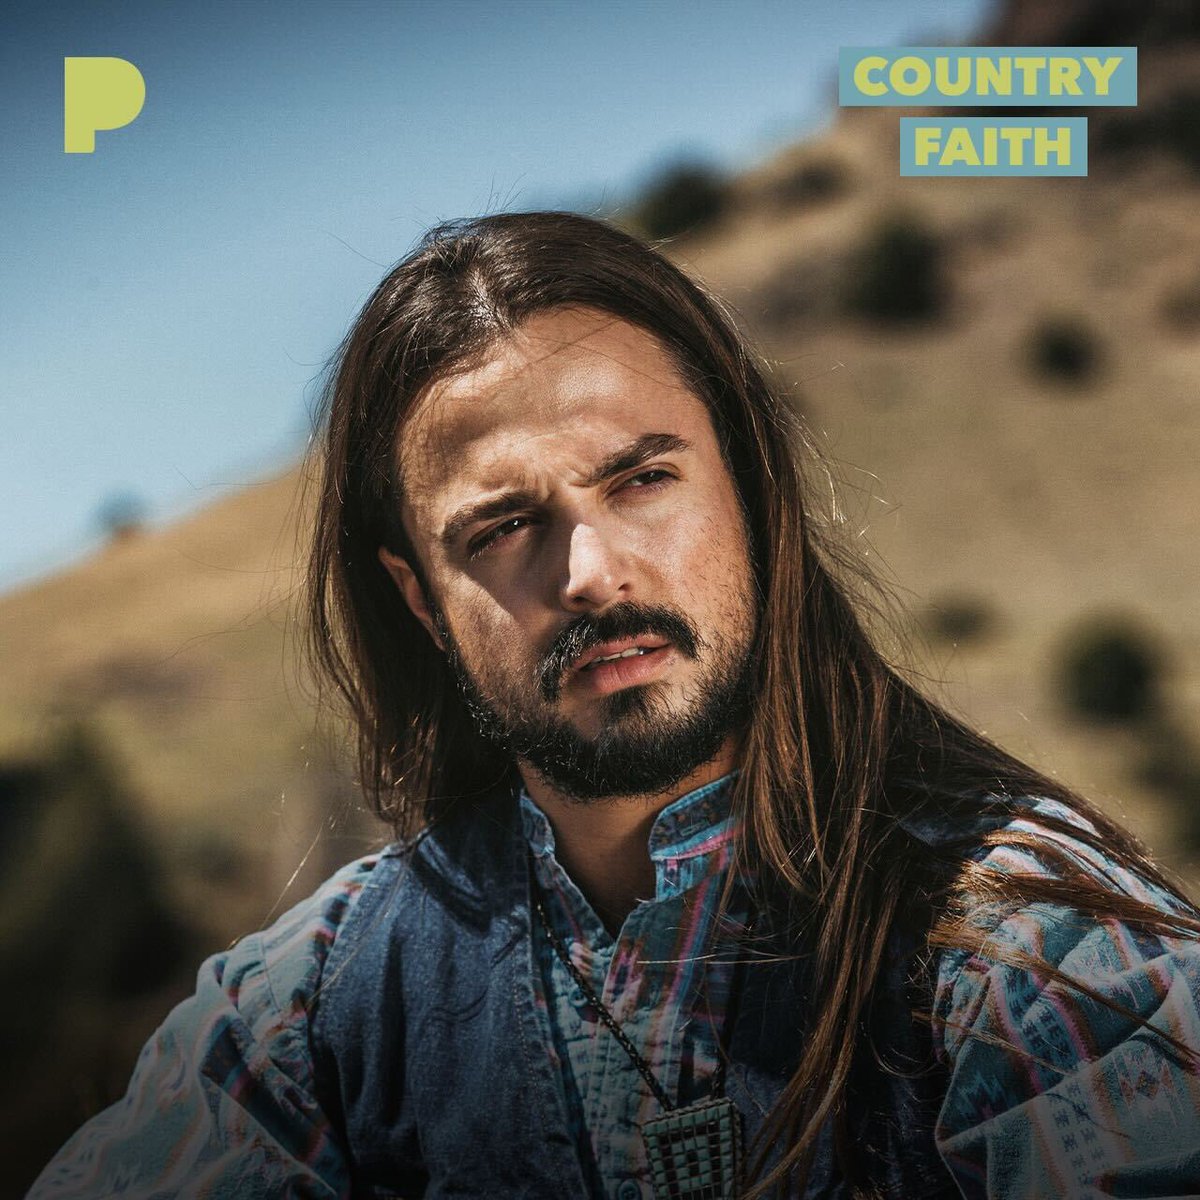 Thank you for making me the cover of ‘Country Faith’ @pandoramusic 🦬🎻🙏